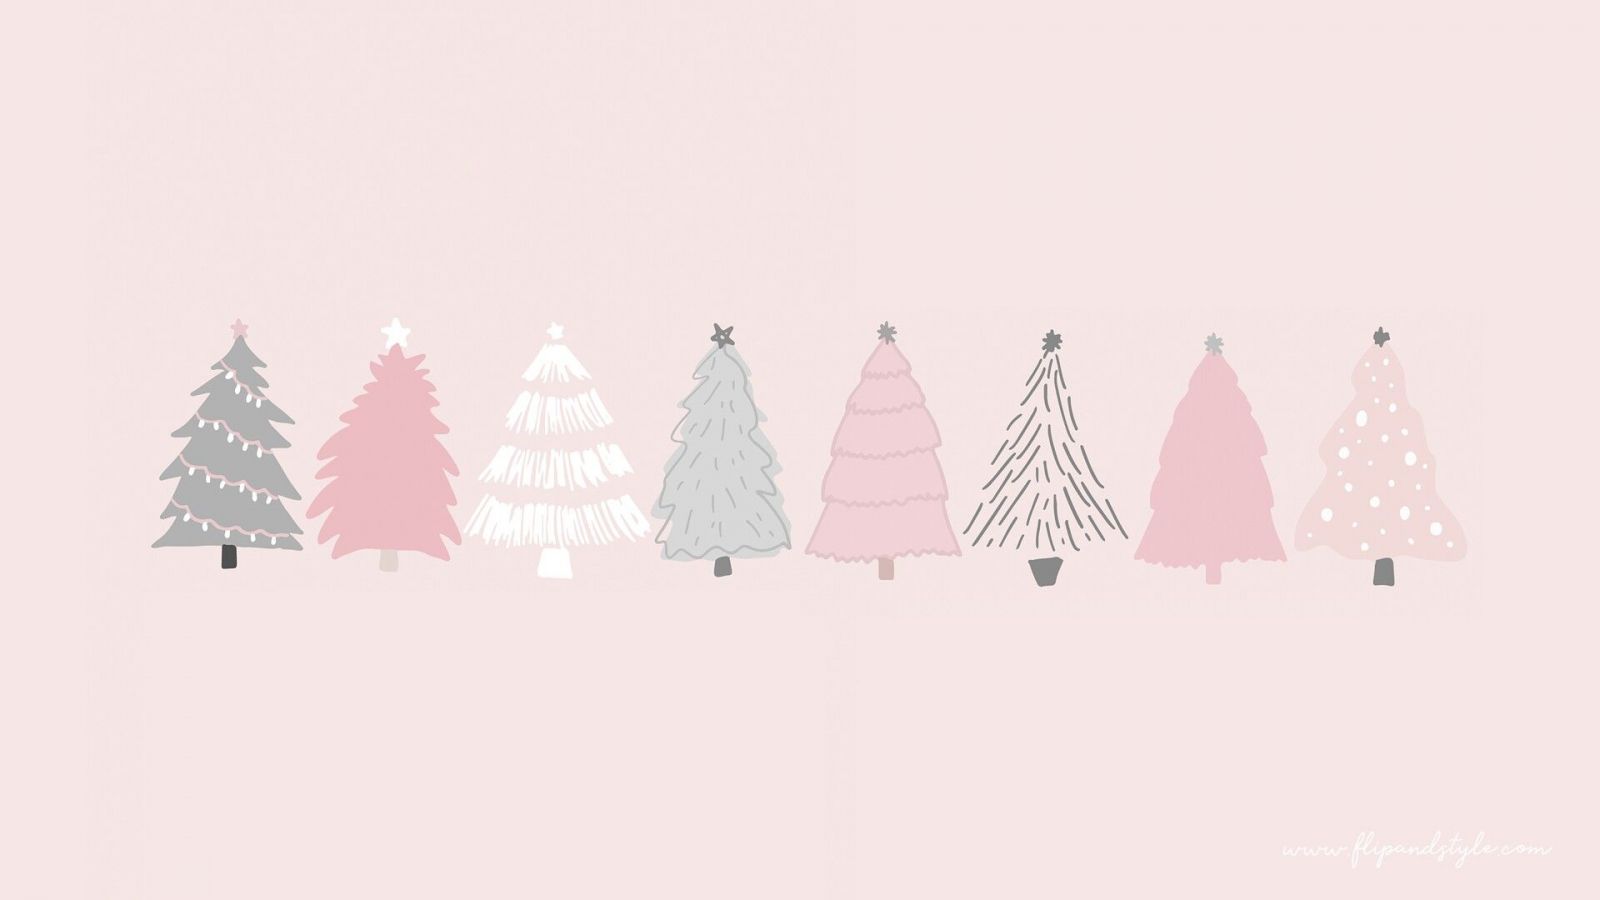 1600x900 Free Download Christmas Aesthetic Tumblr Computer Wallpaper Top 1920x1080 For Your Desktop Mobile Tablet Explore Christmas Aesthetic Wallpaper Christmas Aesthetic Wallpaper Aesthetic Wallpaper Christmas Aesthetic Wallpaper